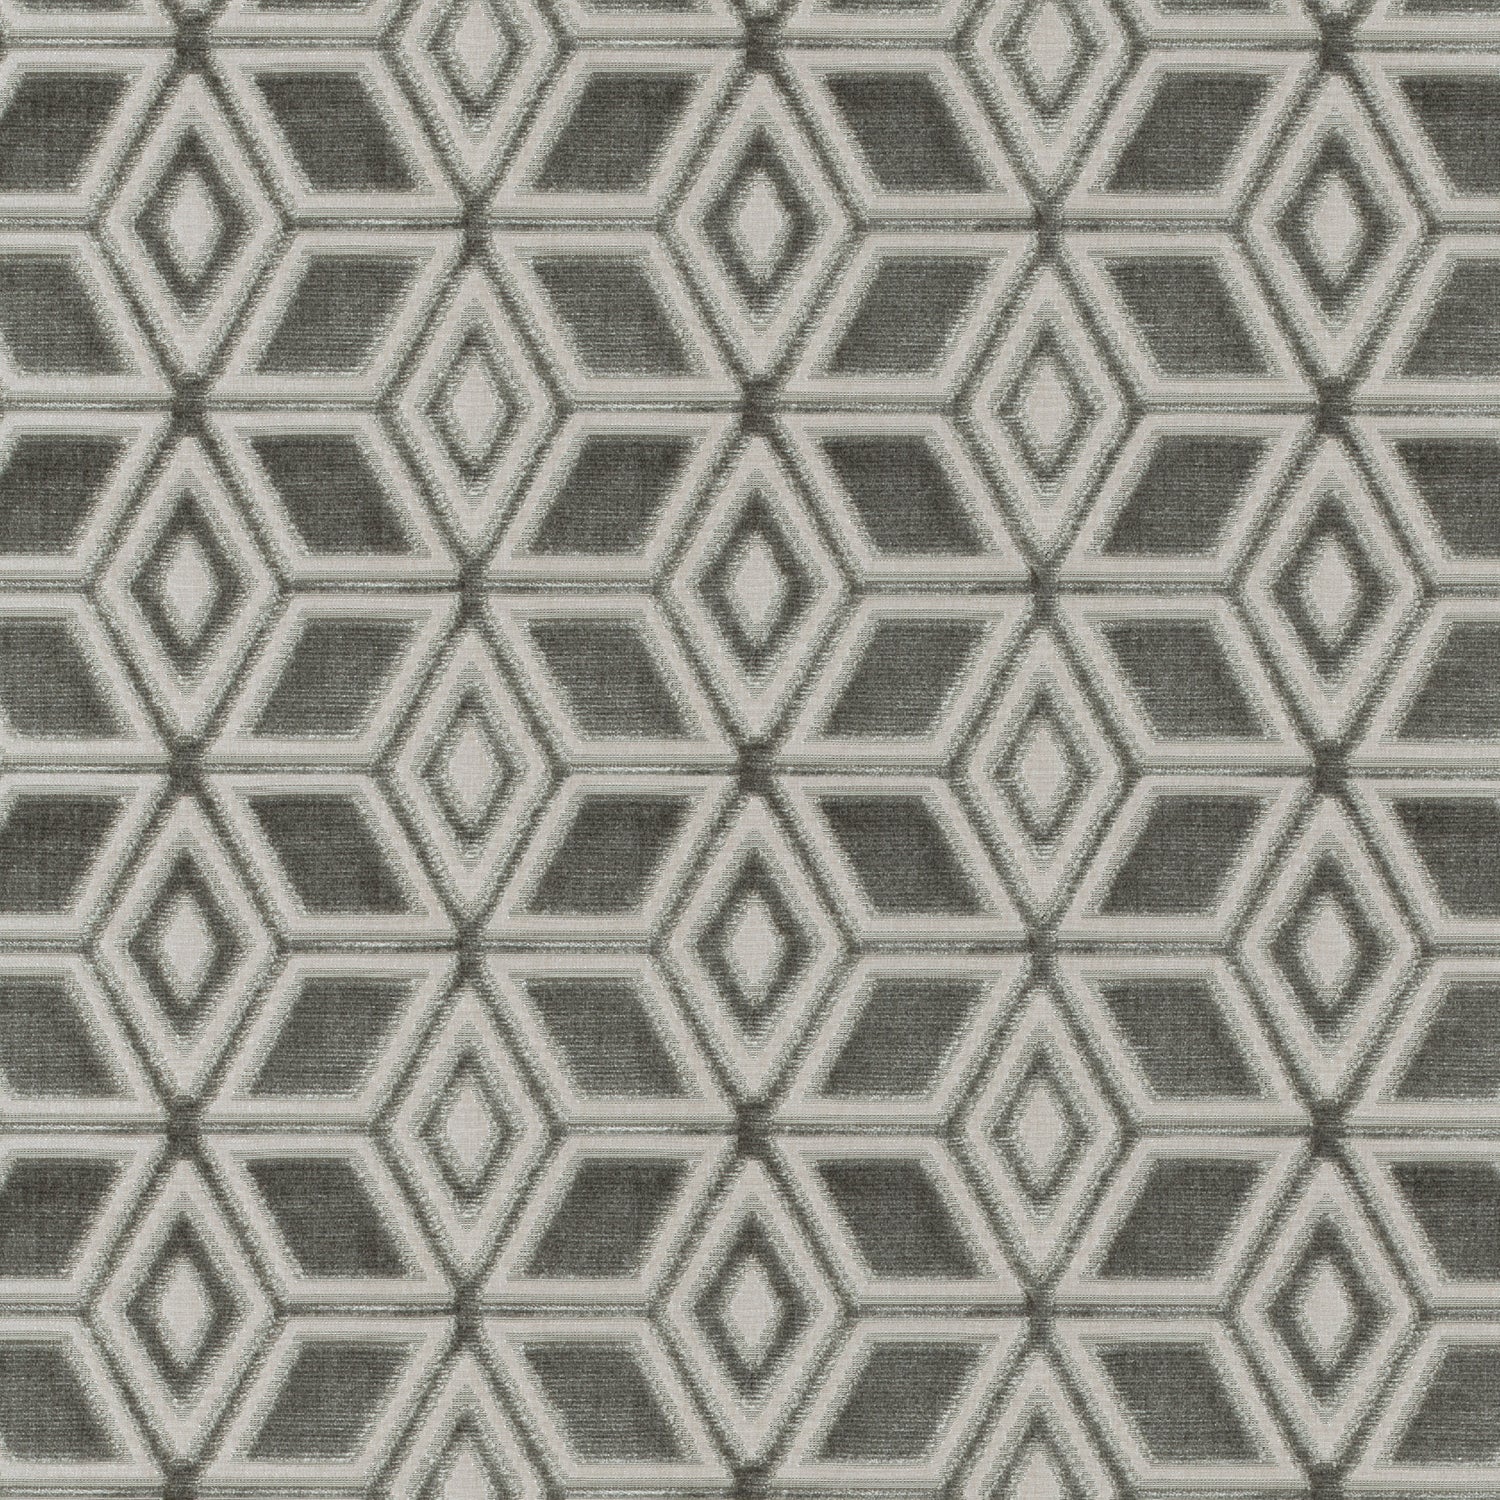 Jardin Maze fabric in bark color - pattern number AW72988 - by Anna French in the Manor collection